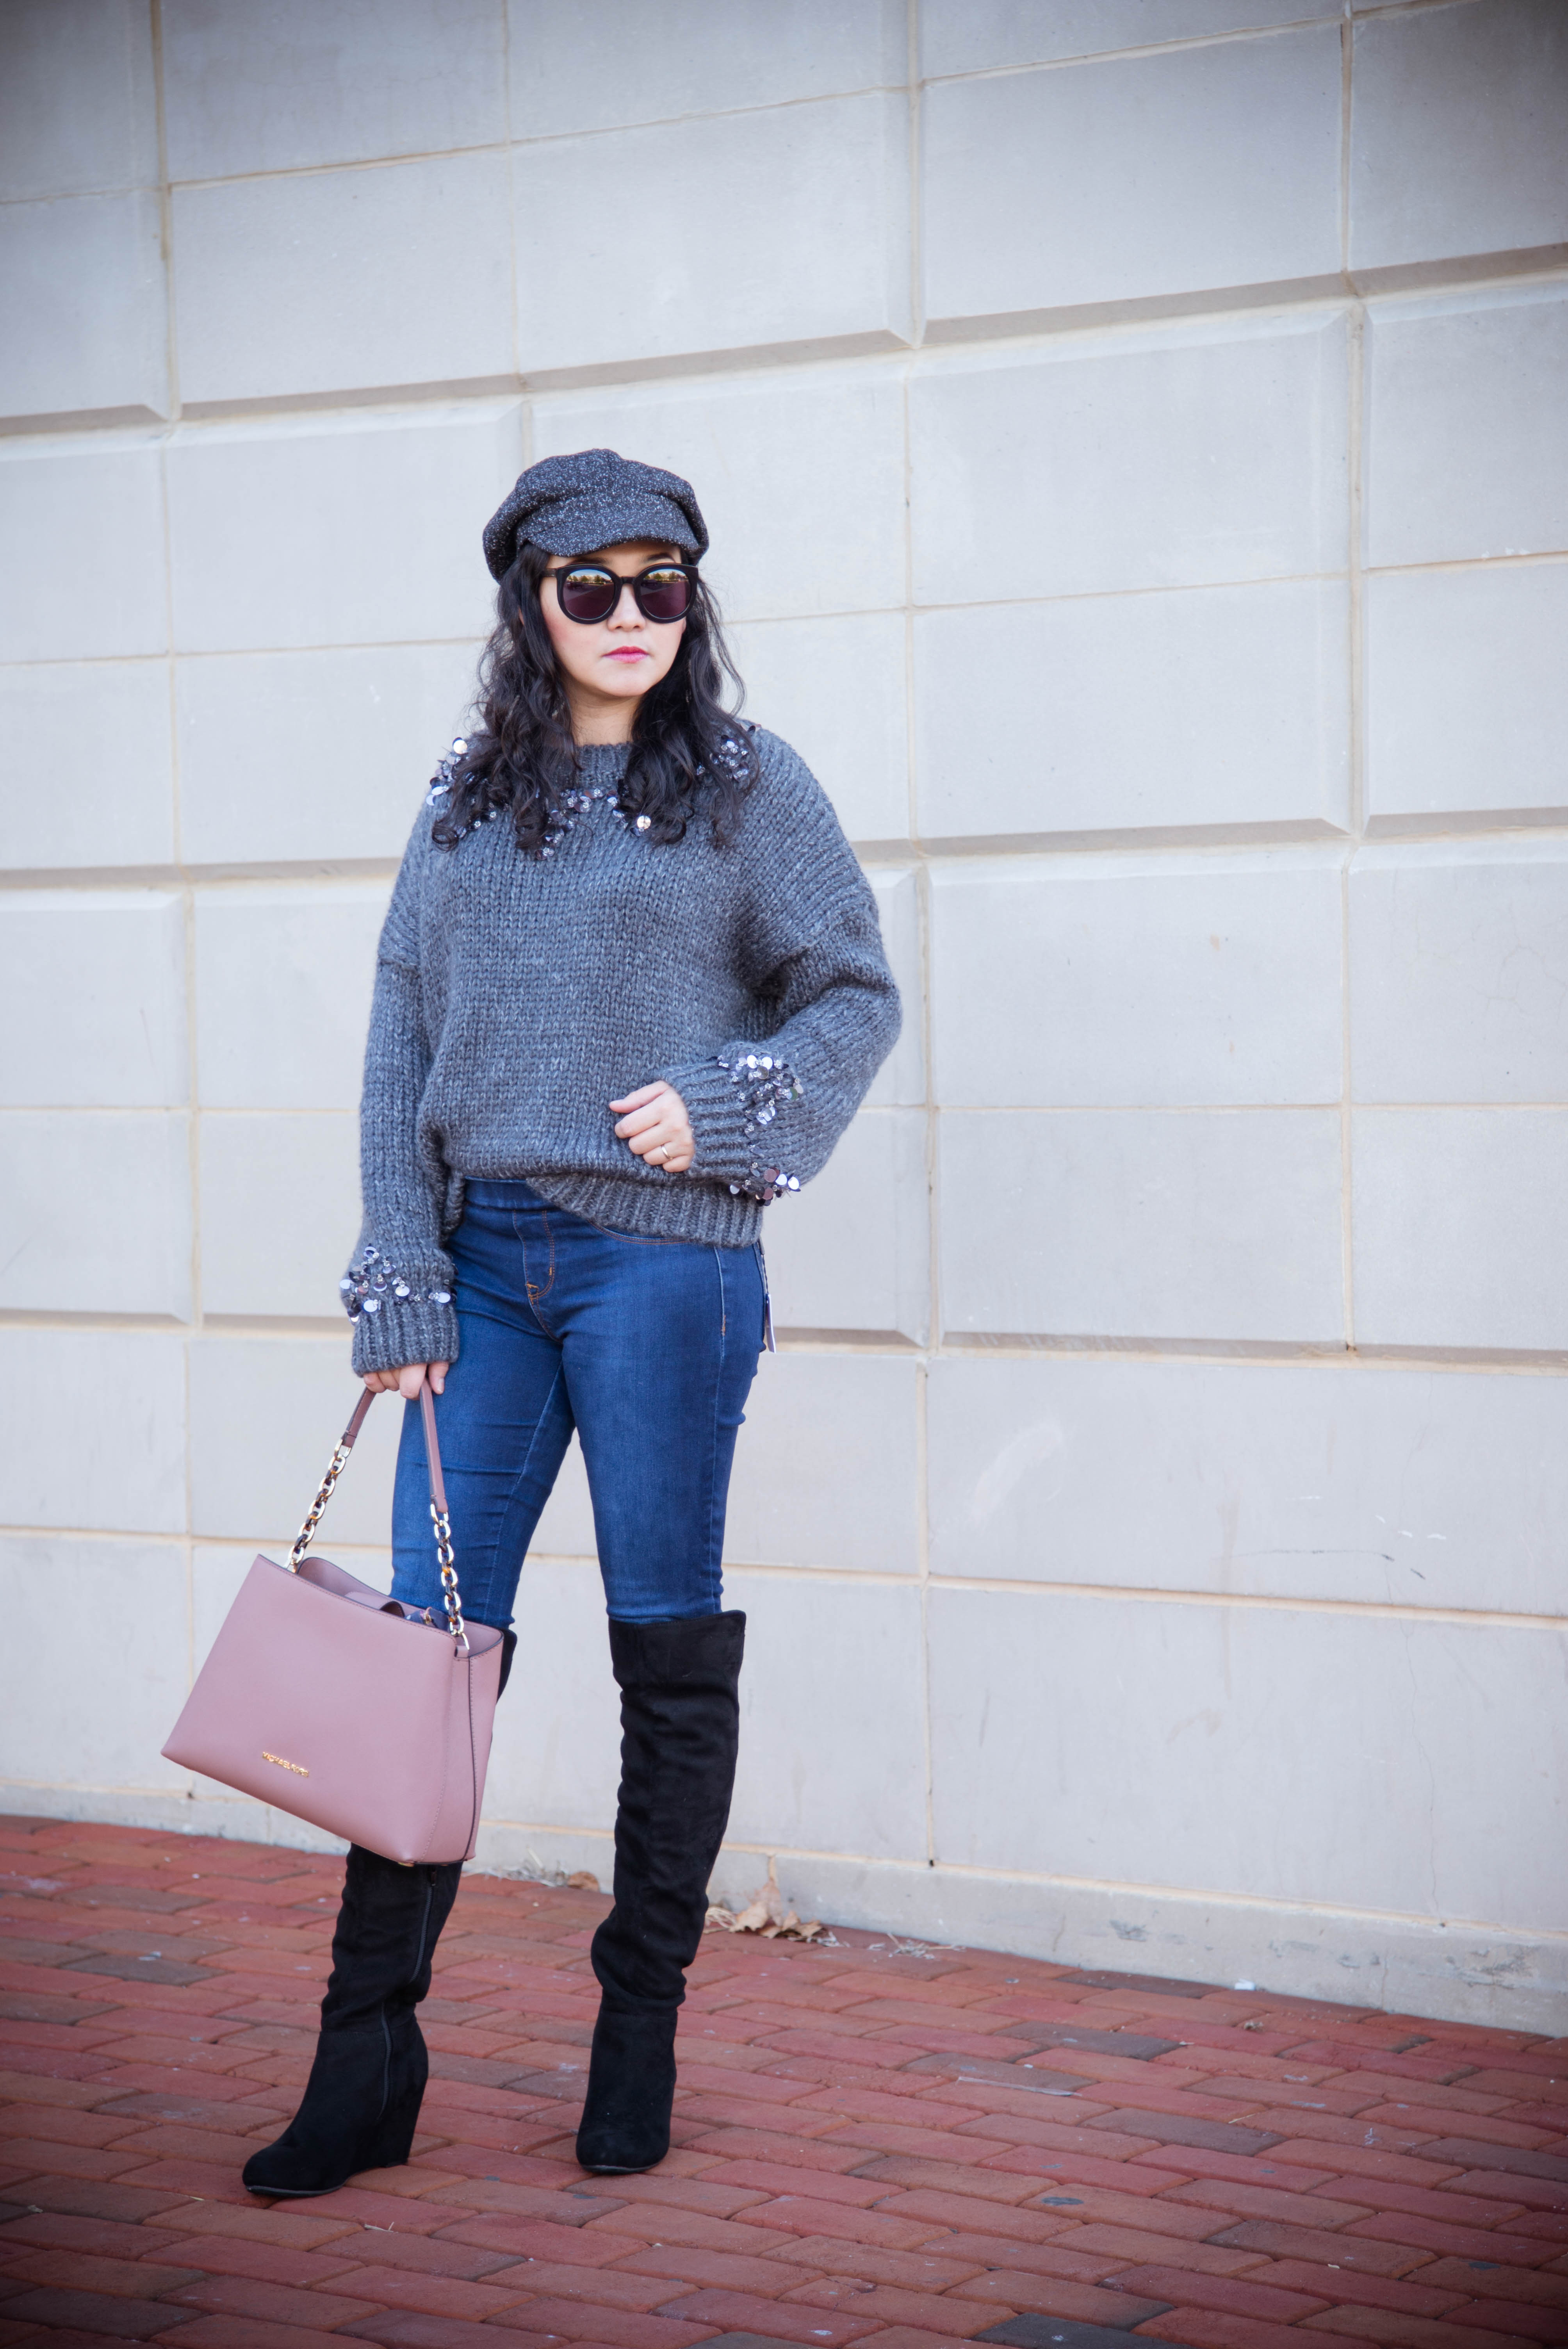 I Sparkle with my Sweater on Mondays - SimplyChristianne